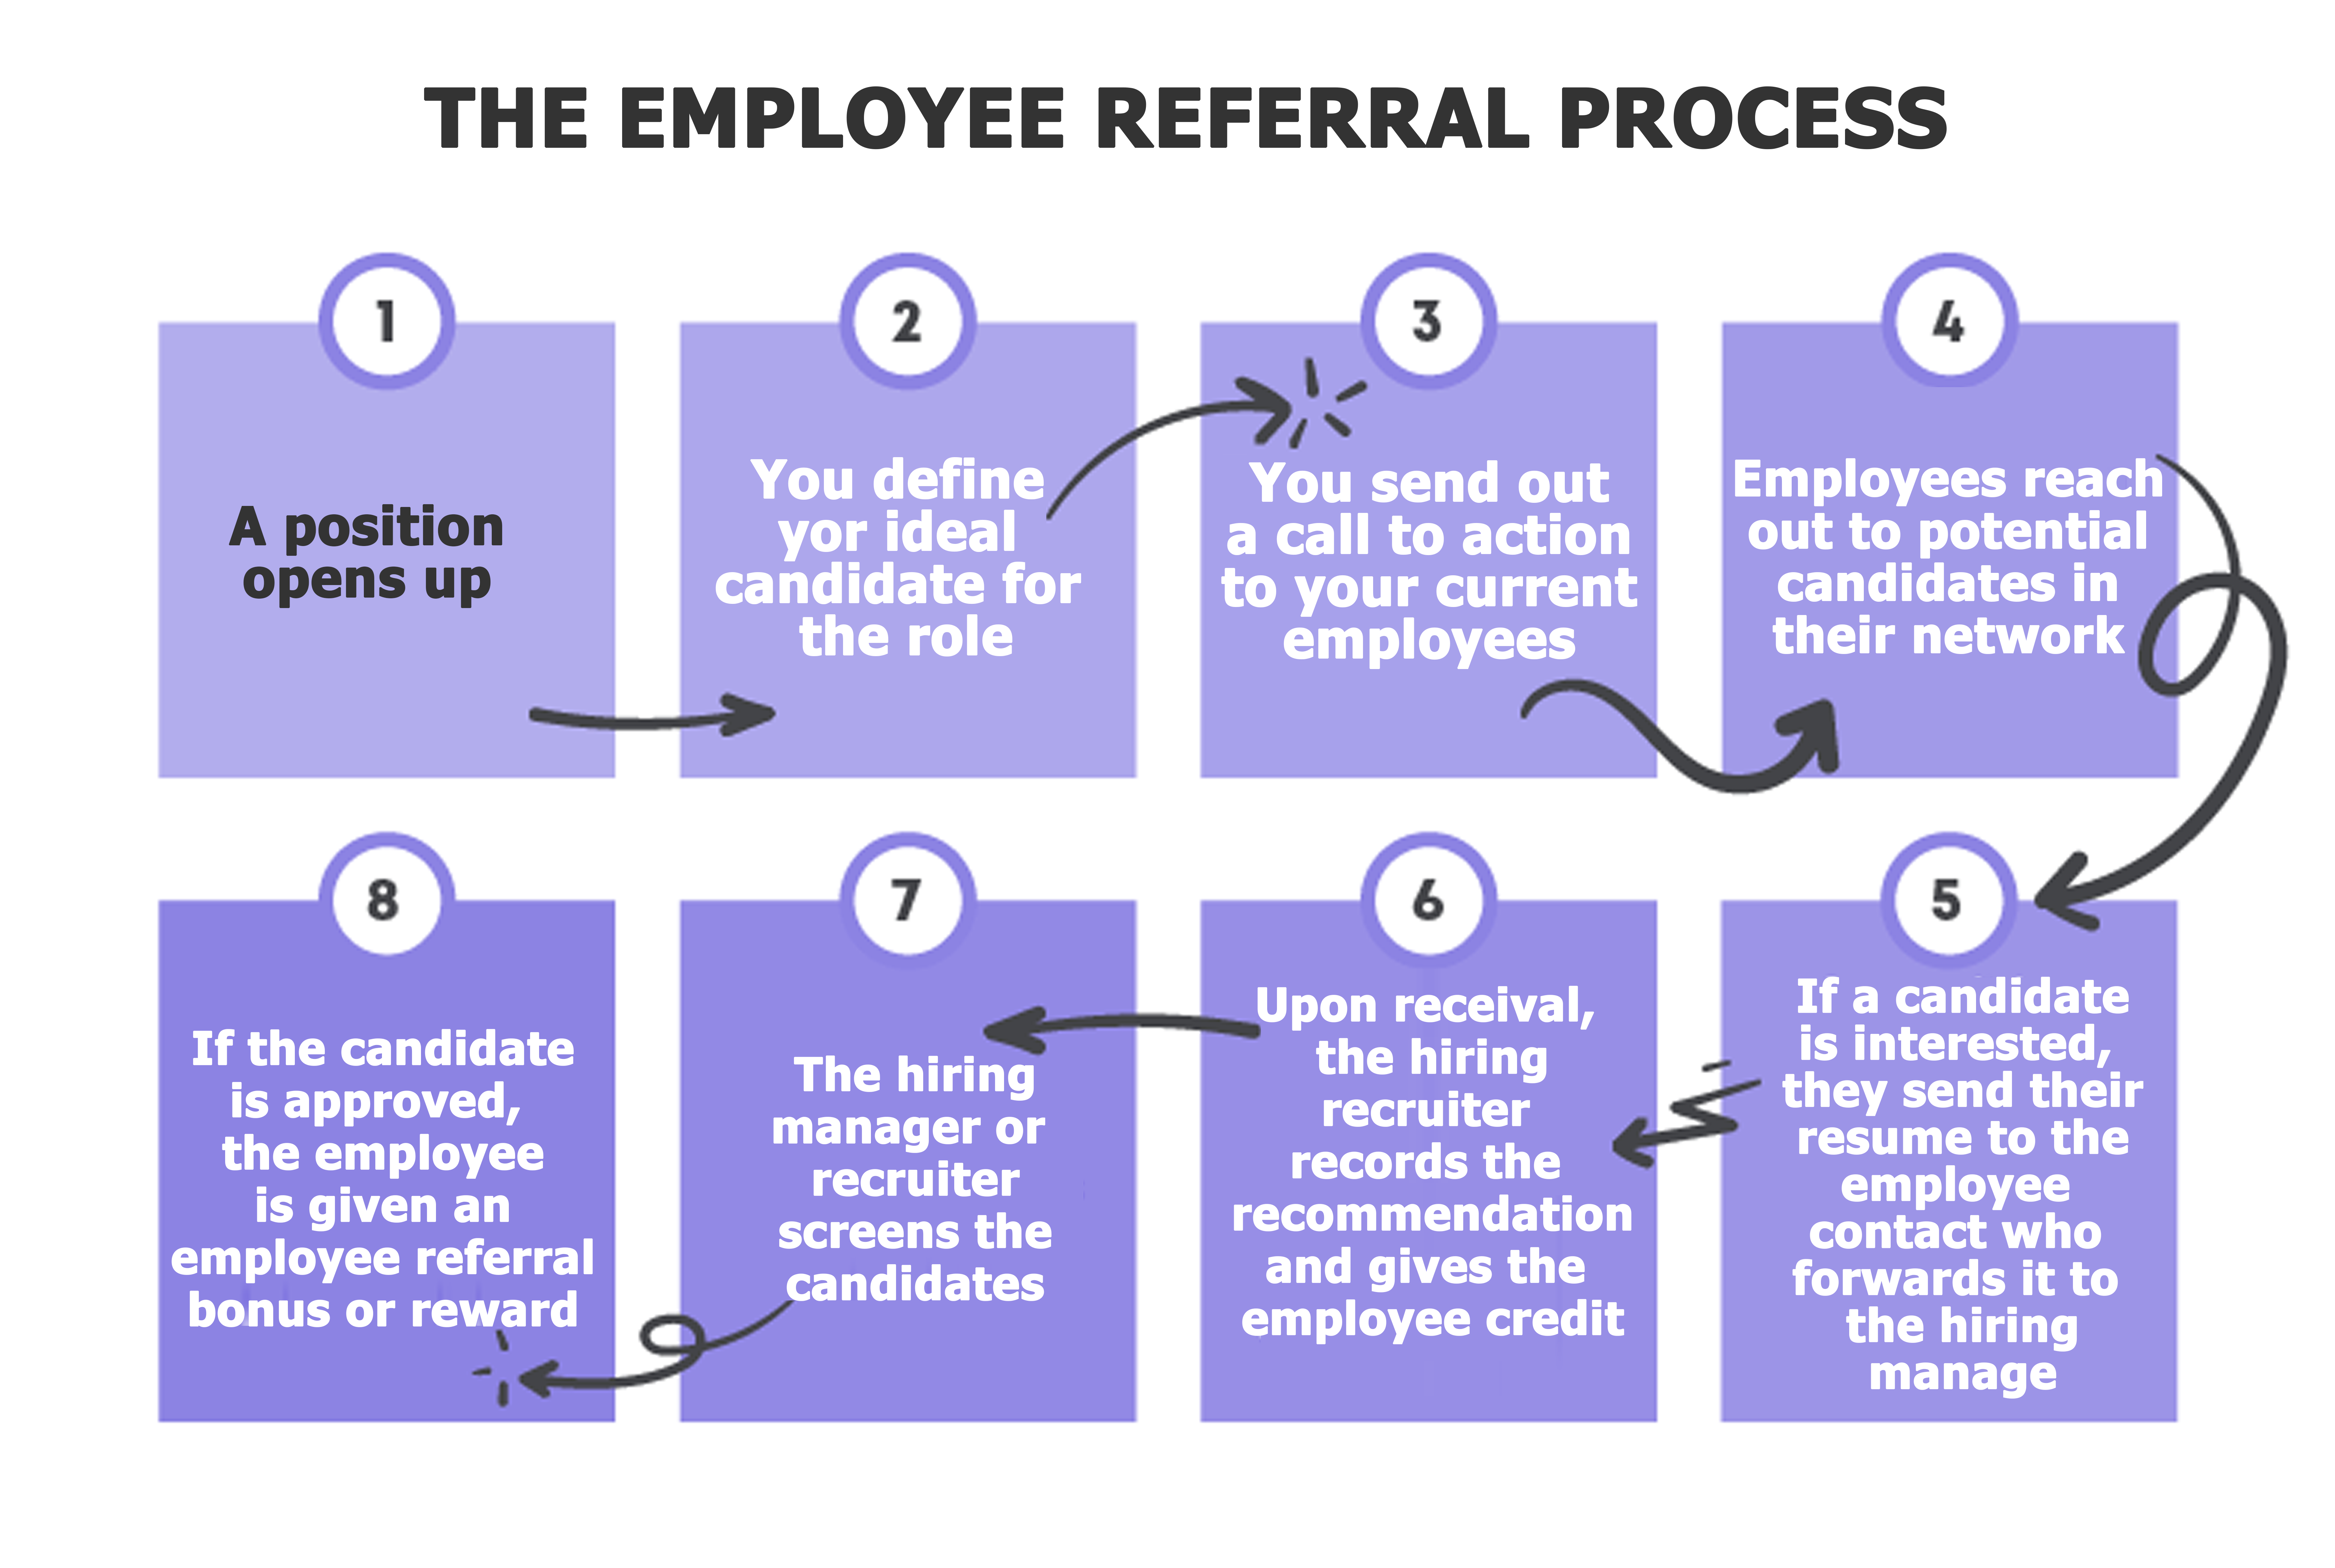 Employee Referral – Get Current Employees on Board